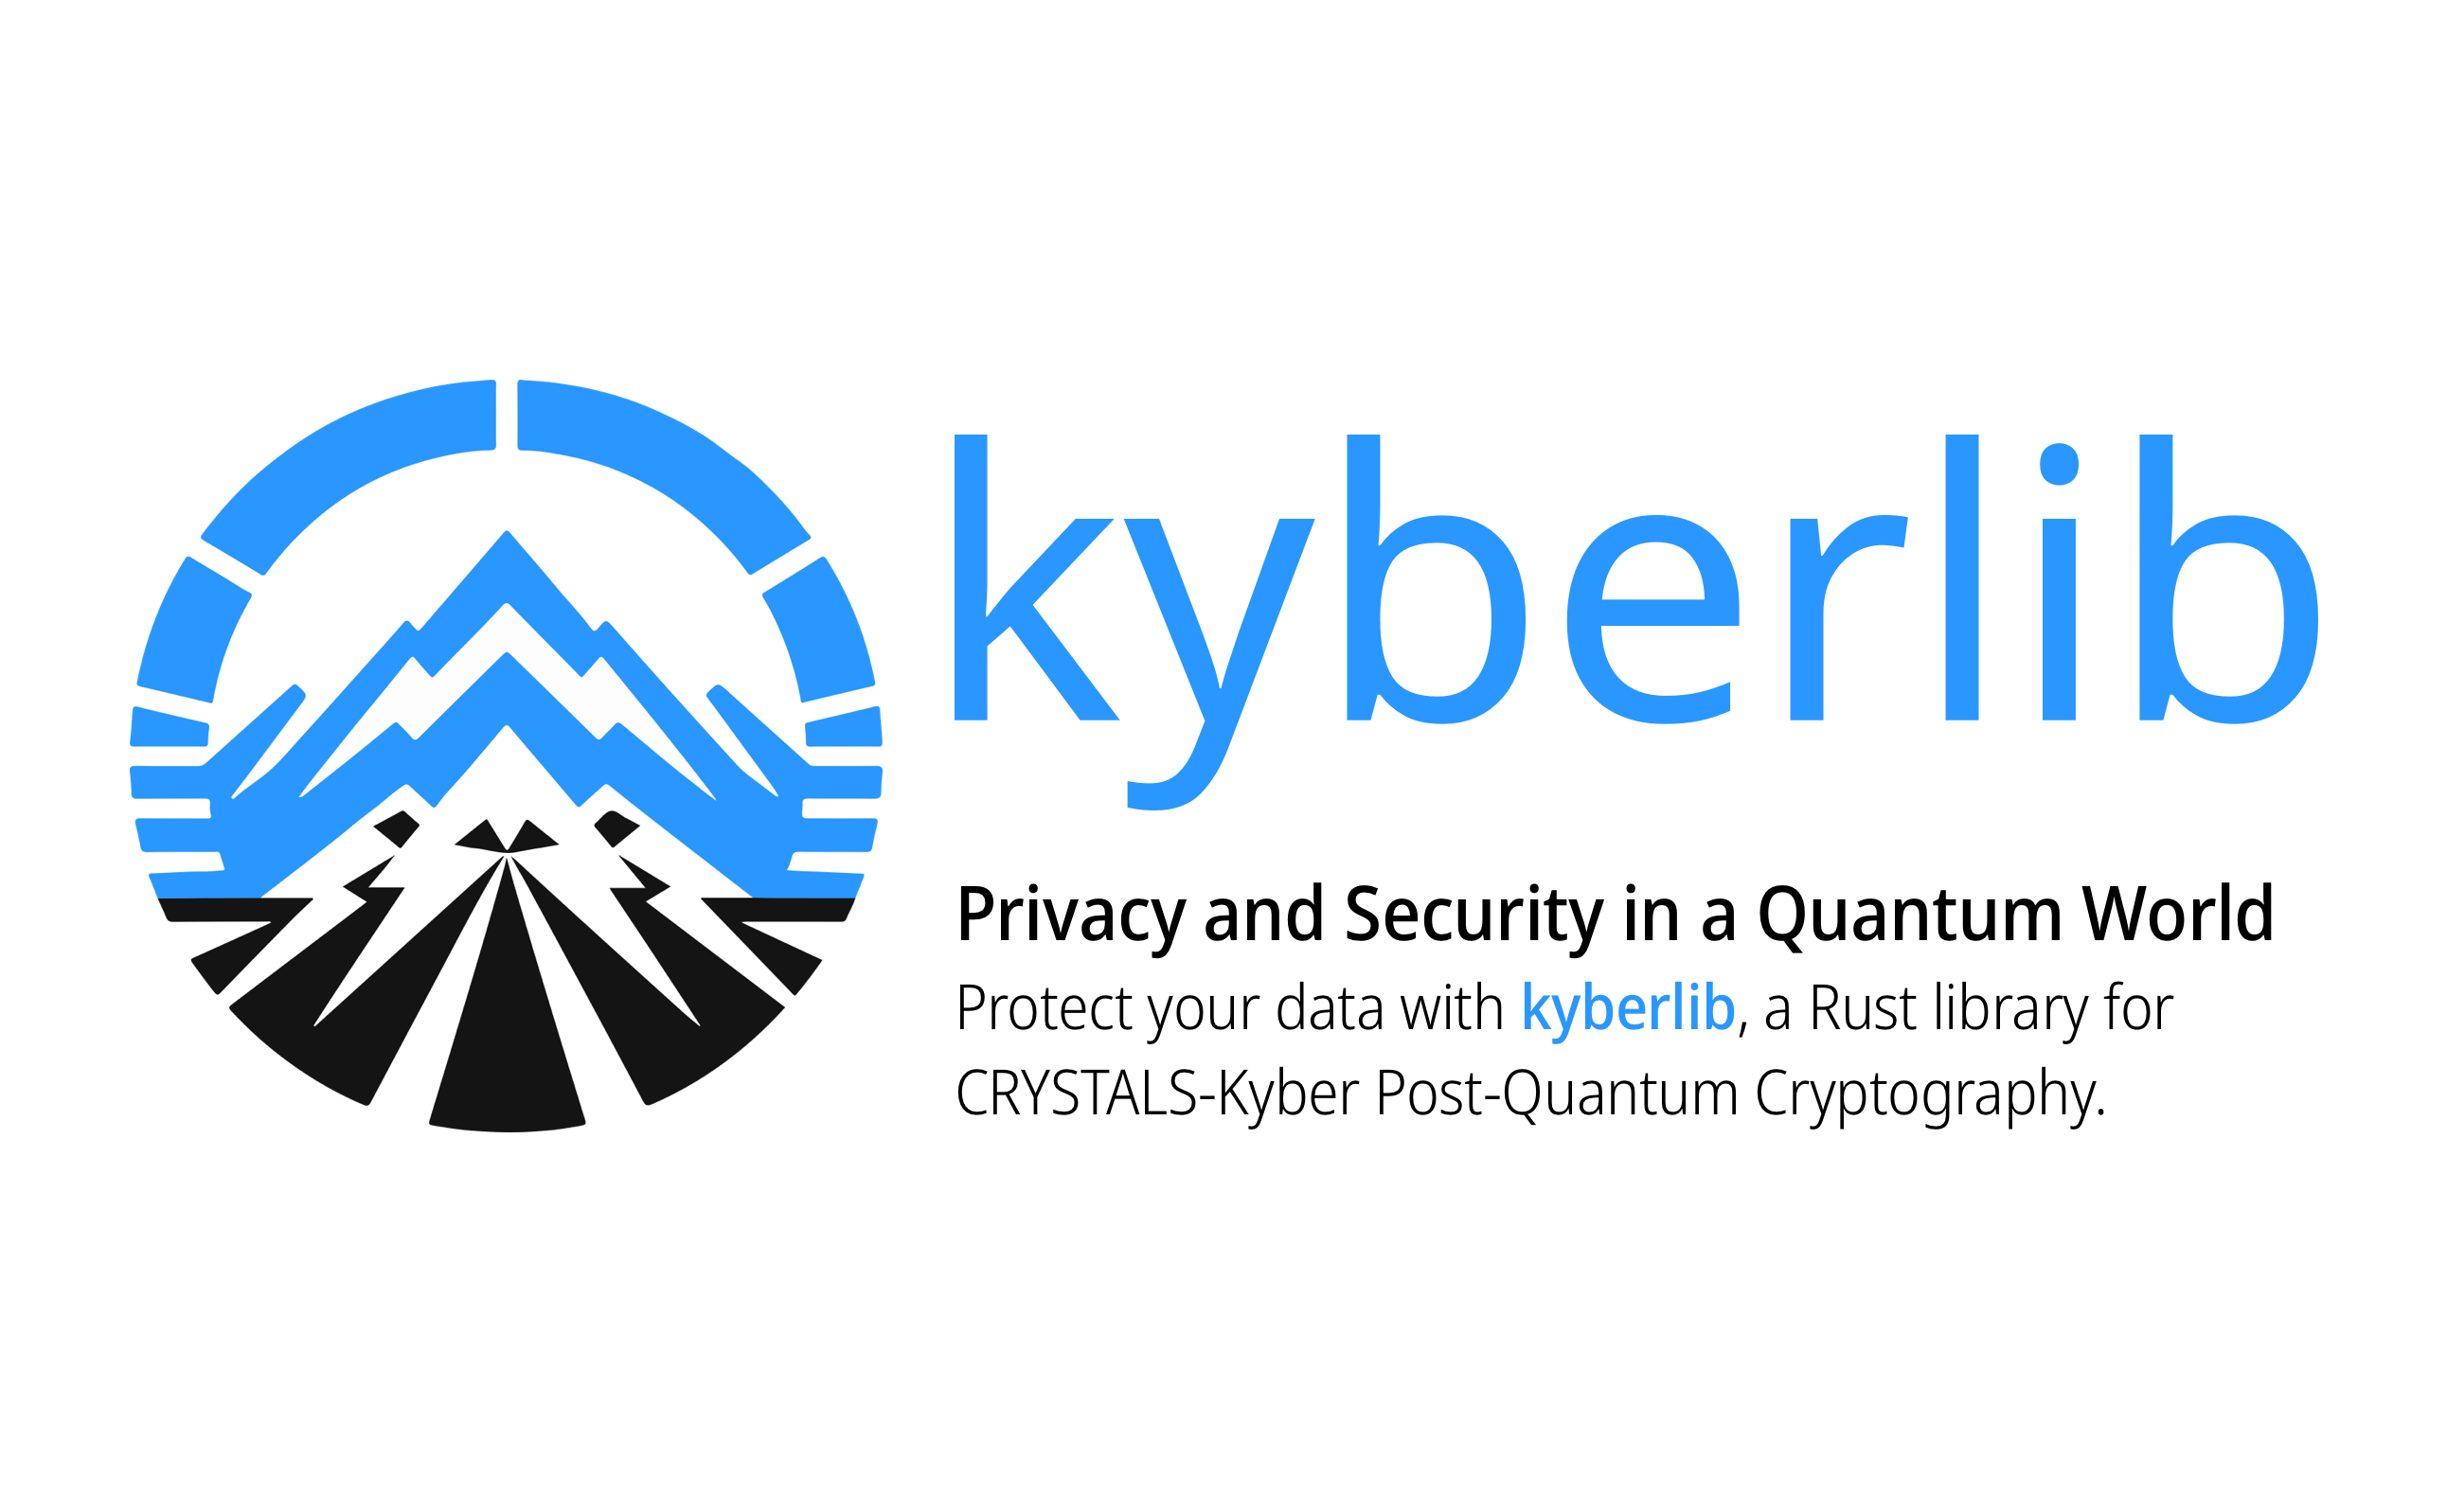 Privacy and Security in a Quantum World